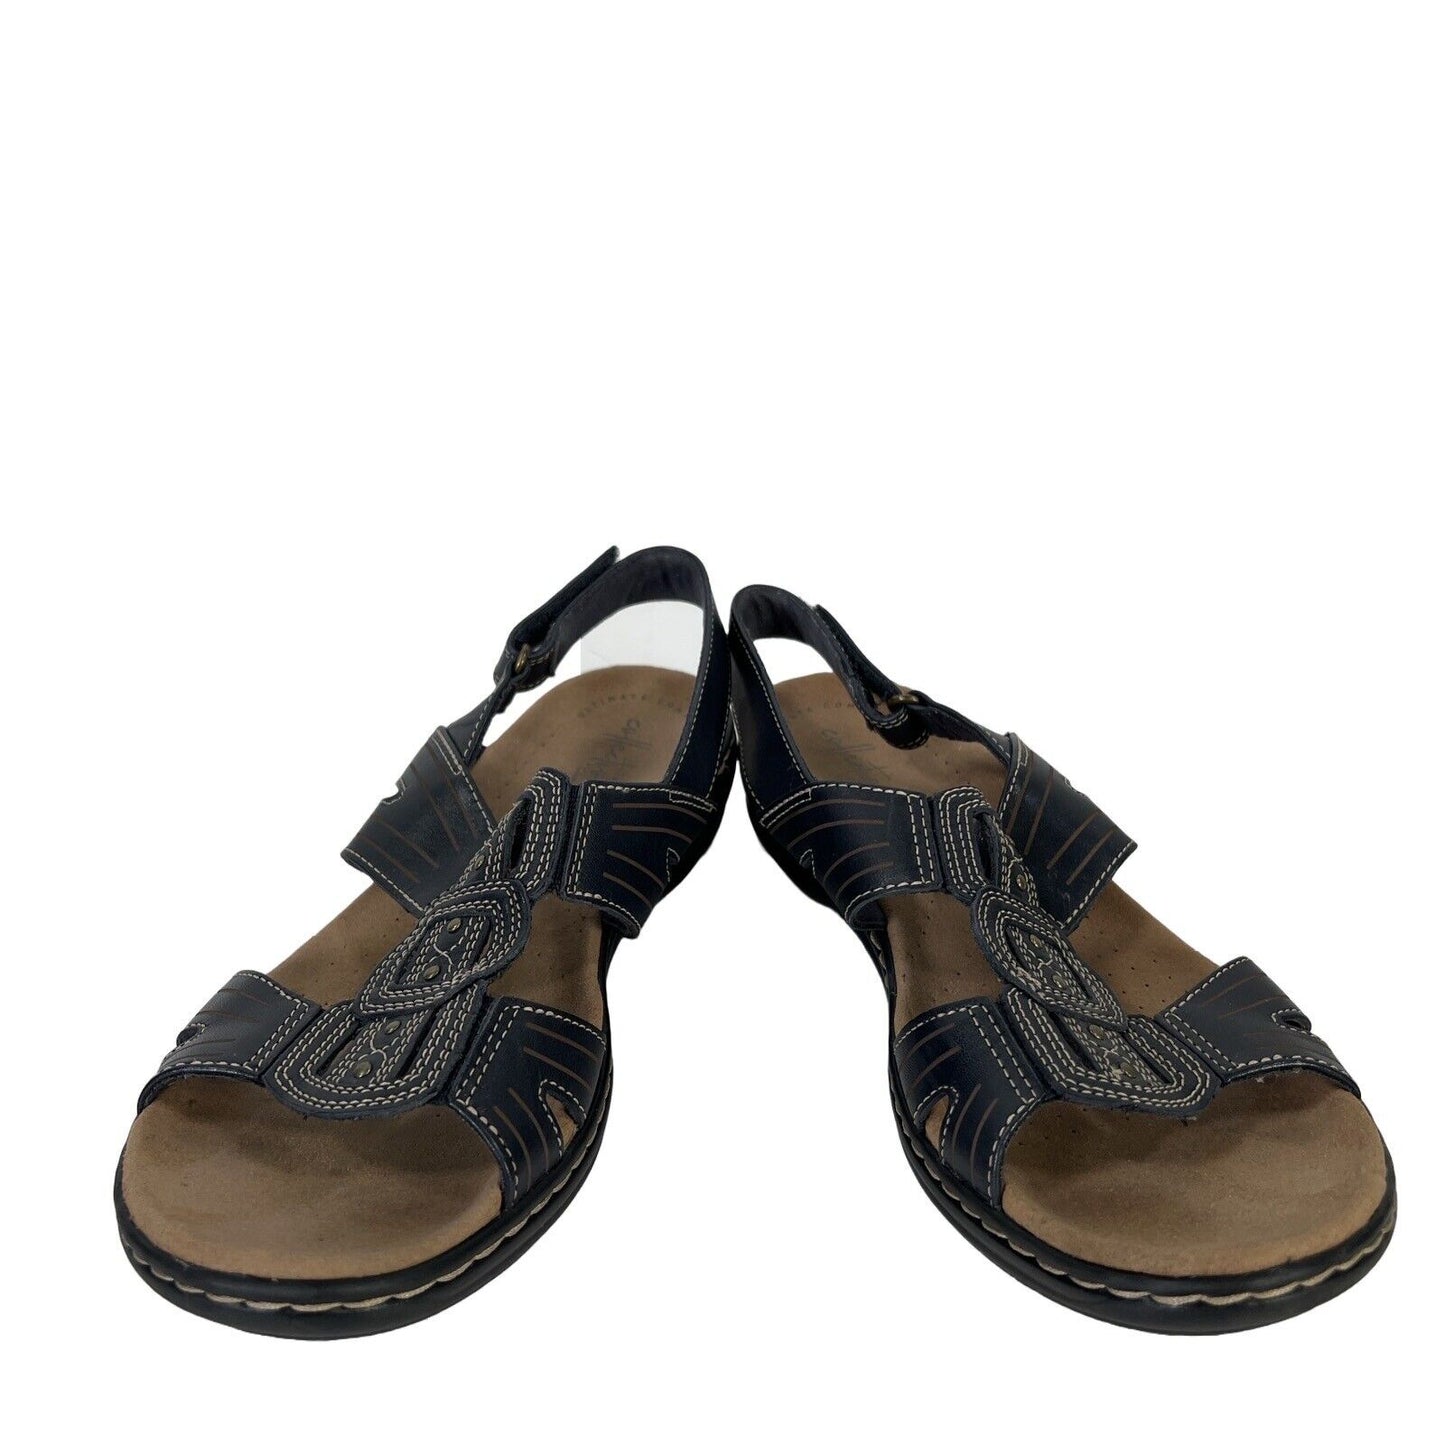 Clarks Collection Women's Blue Faux Leather Slingback Sandals - 9.5